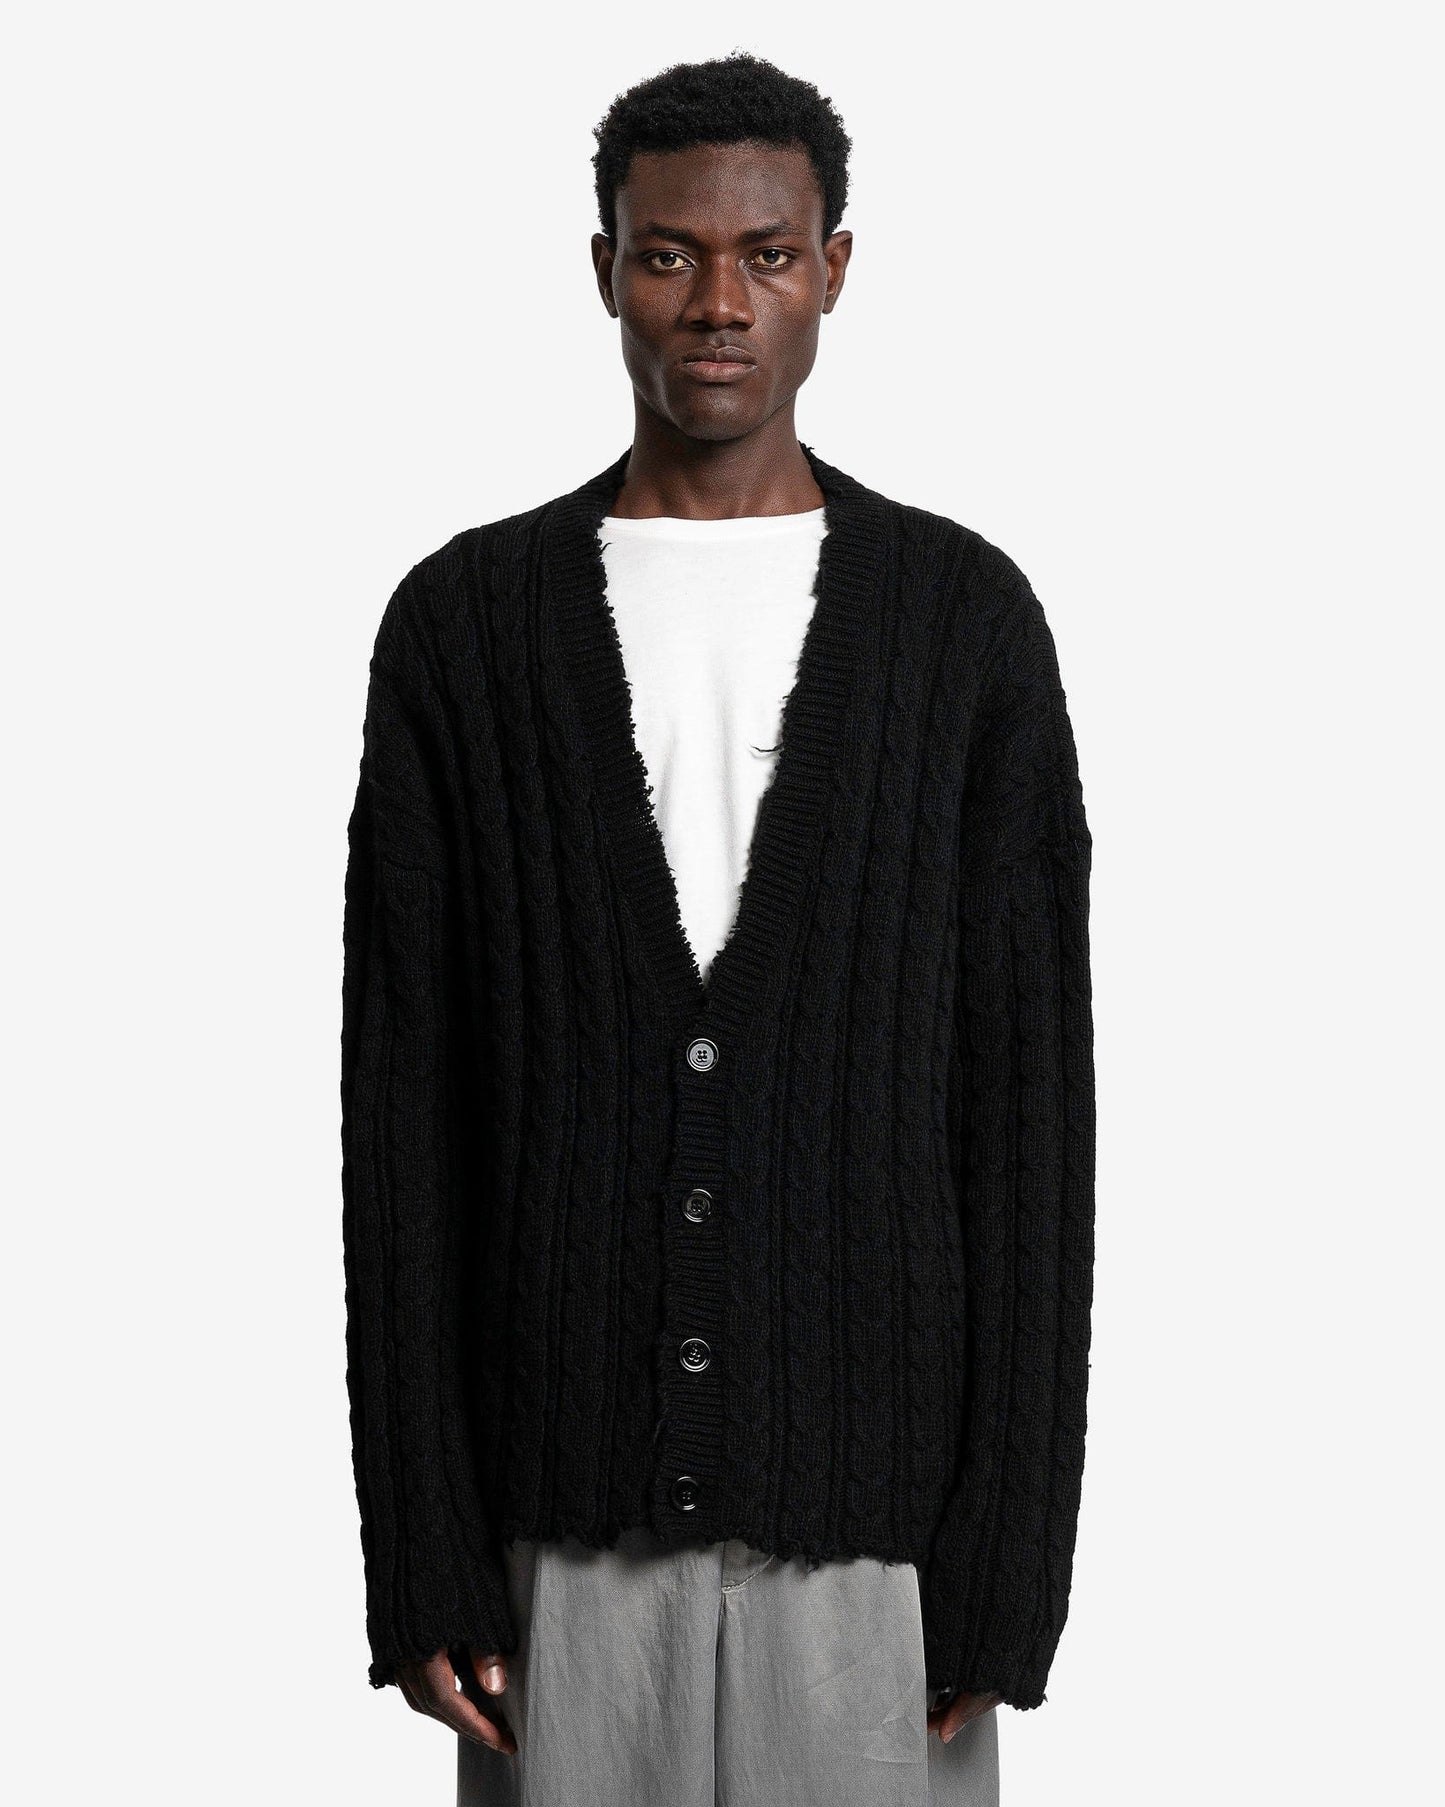 MM6 Maison Margiela Men's Sweater Cable Knit Cardigan in Black